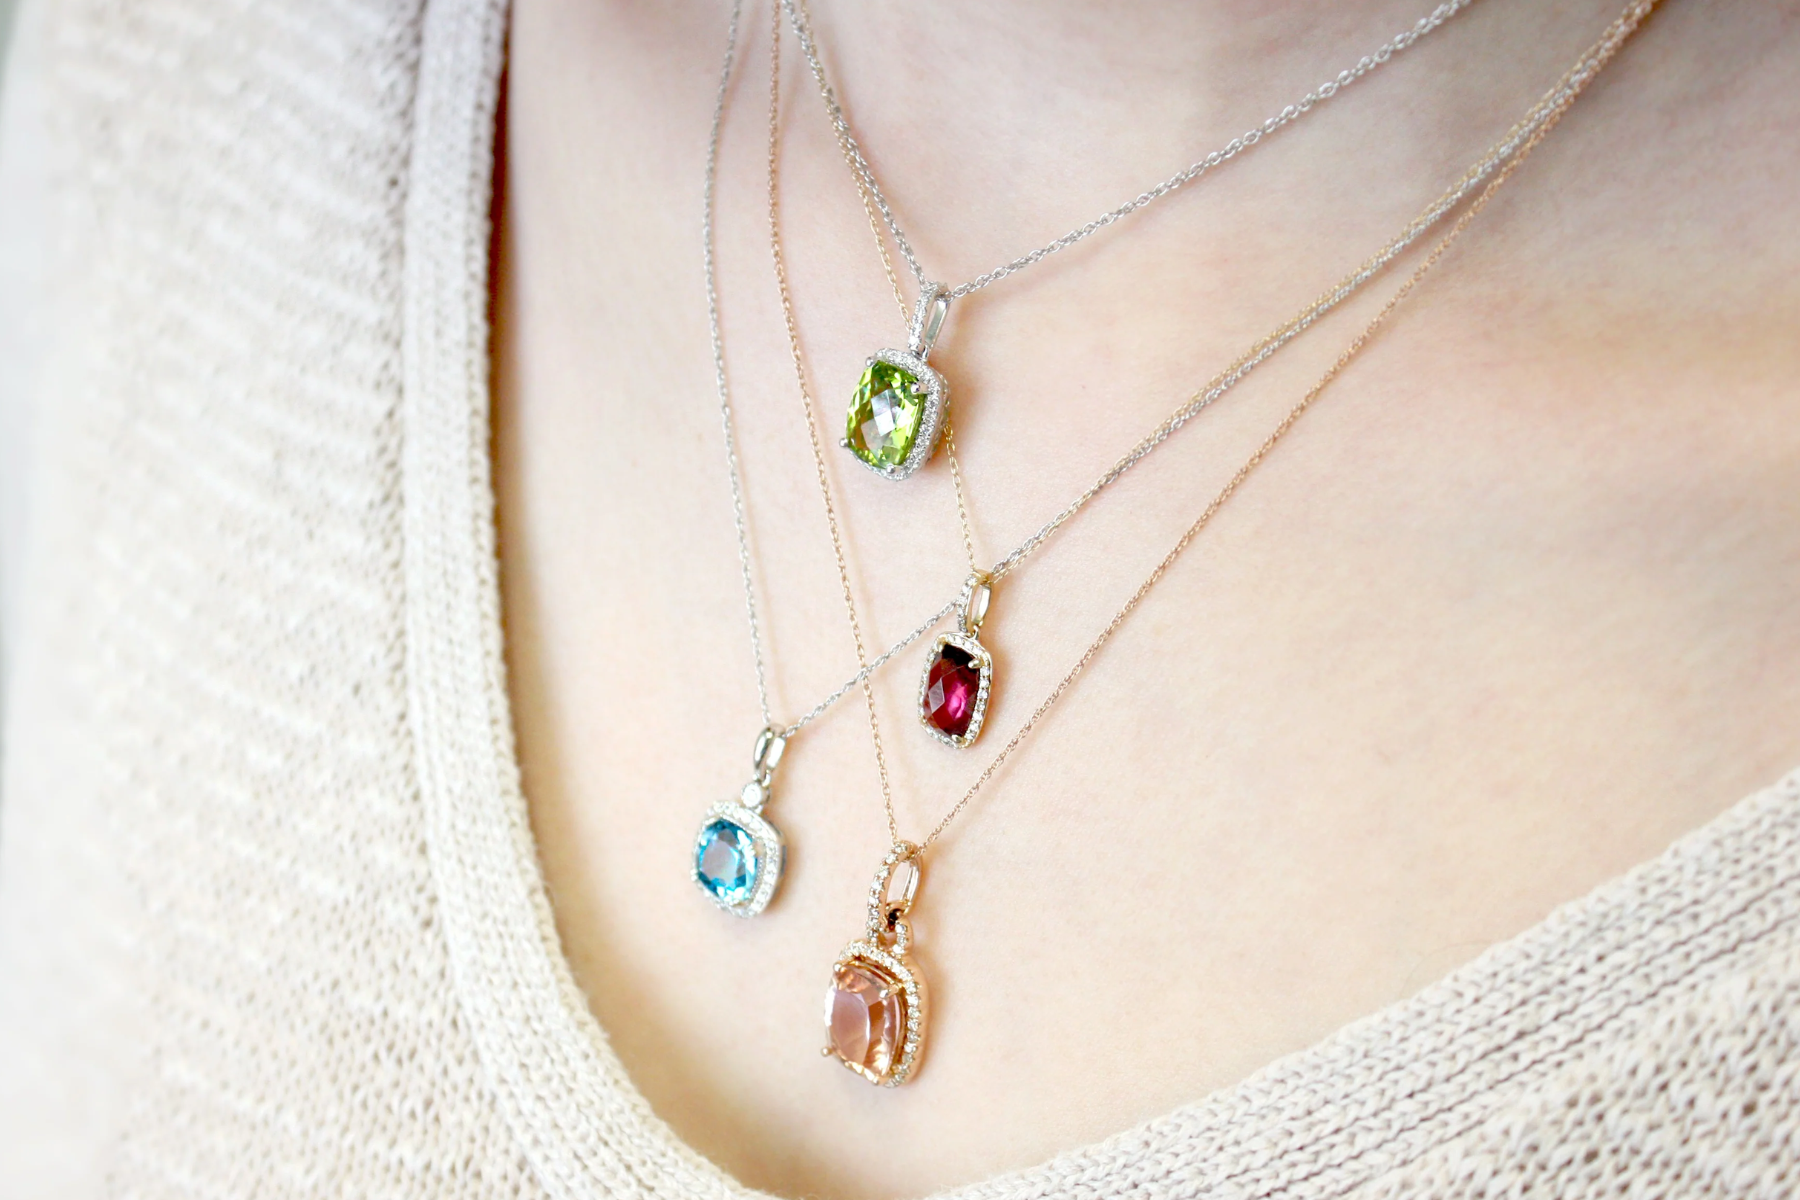 A woman's neck is adorned with four birthstone necklaces